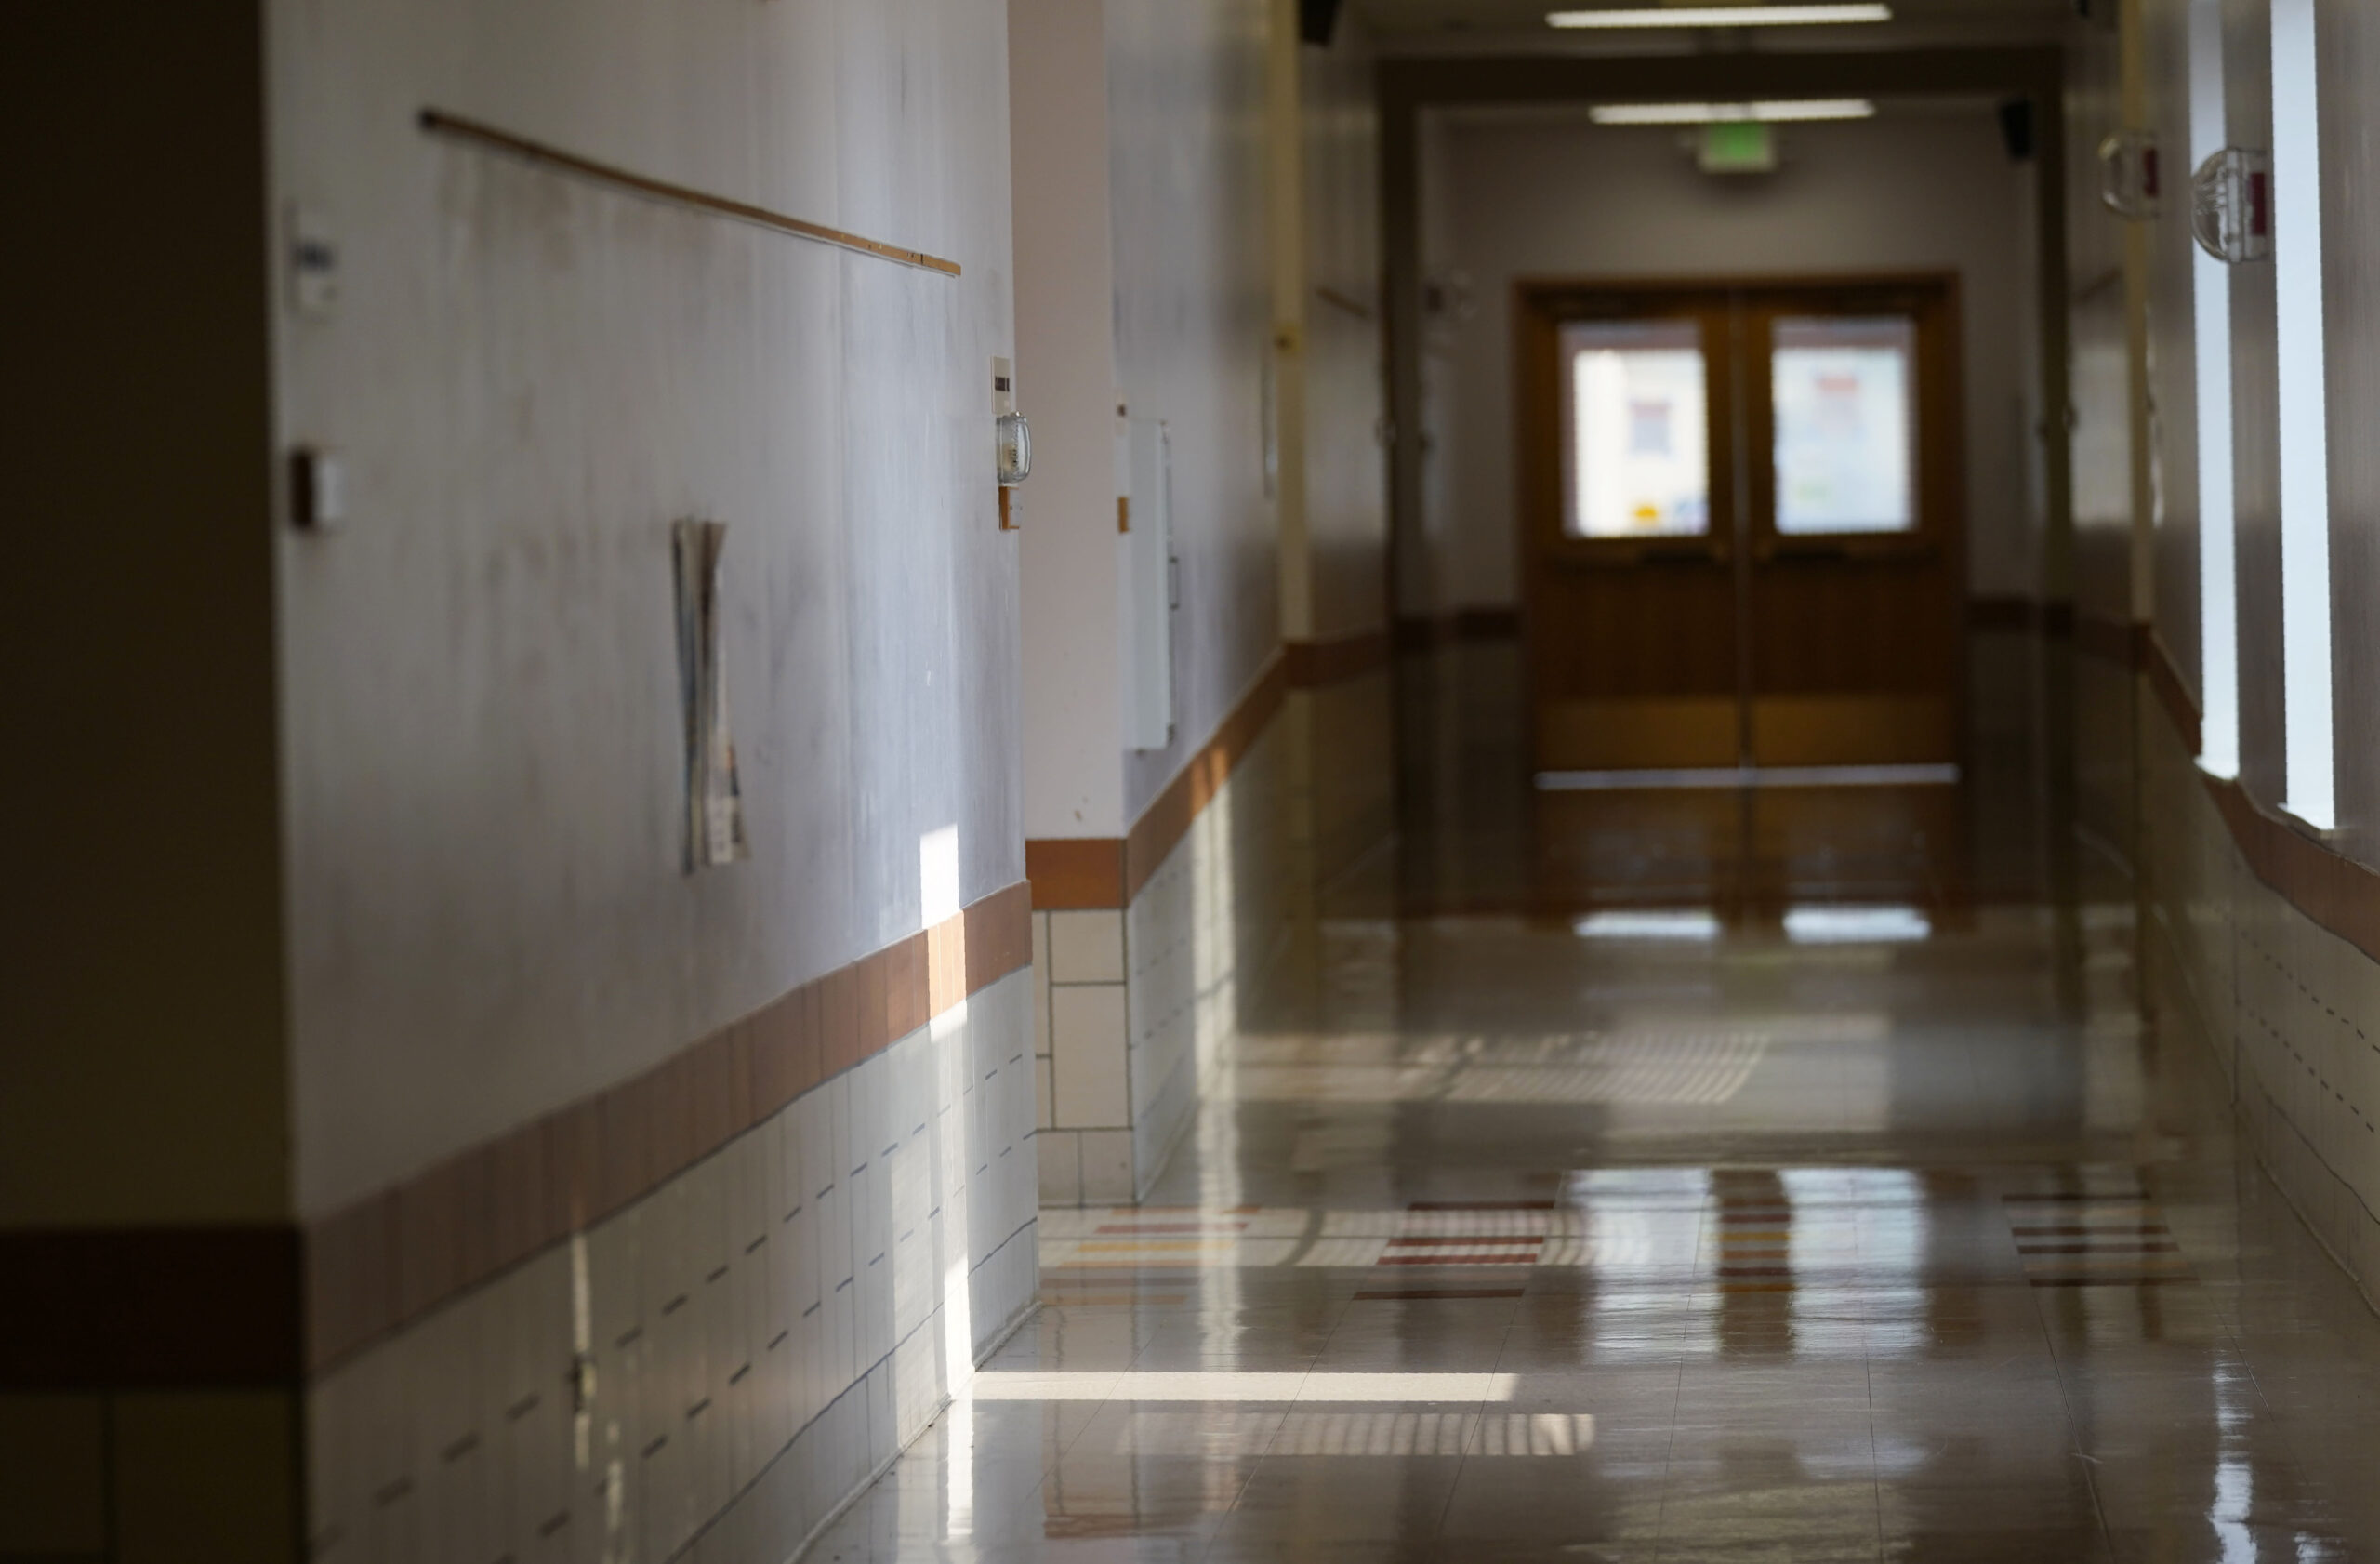 Report: Nearly 7K instances of student physical restraint occurred in Wisconsin schools